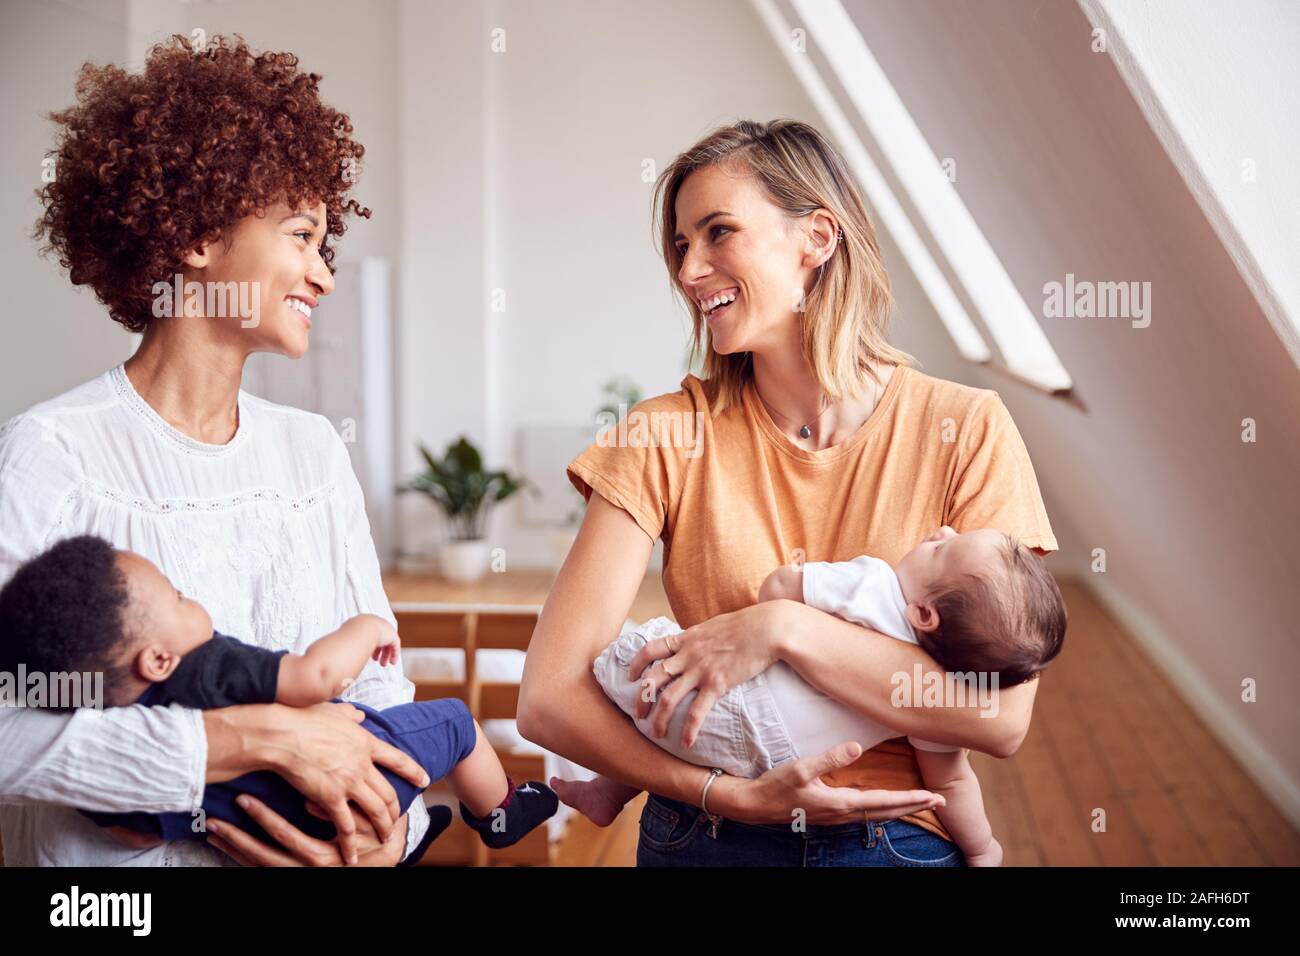 Two Mothers Meeting Holding Newborn Babies At Home In Loft Apartment Stock Photo